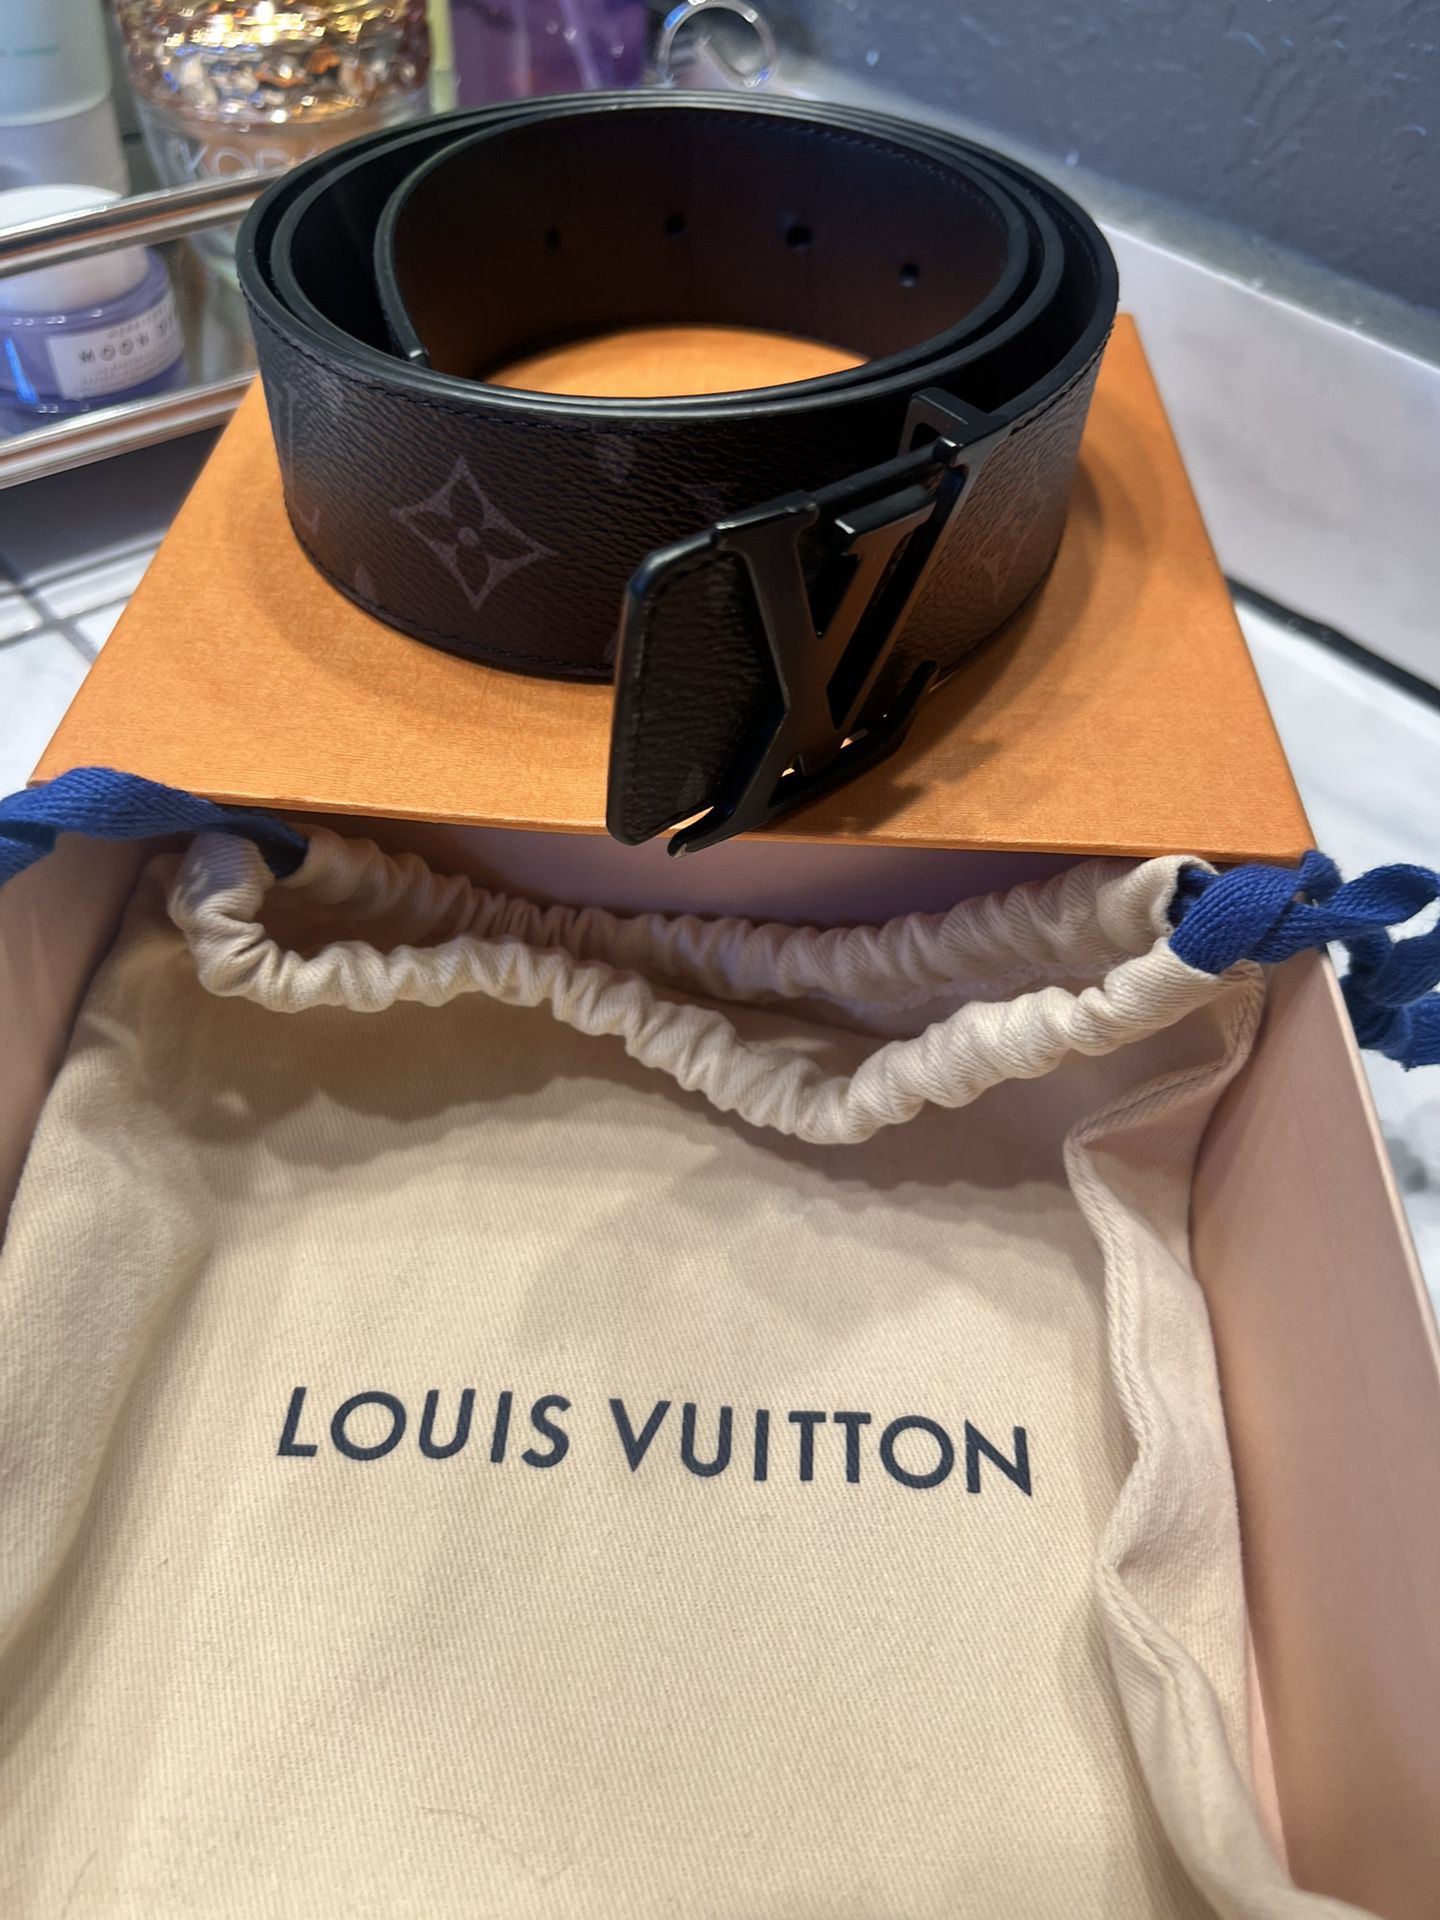 Louis Vuitton Belt With Bag And Box for Sale in Hayward, CA - OfferUp